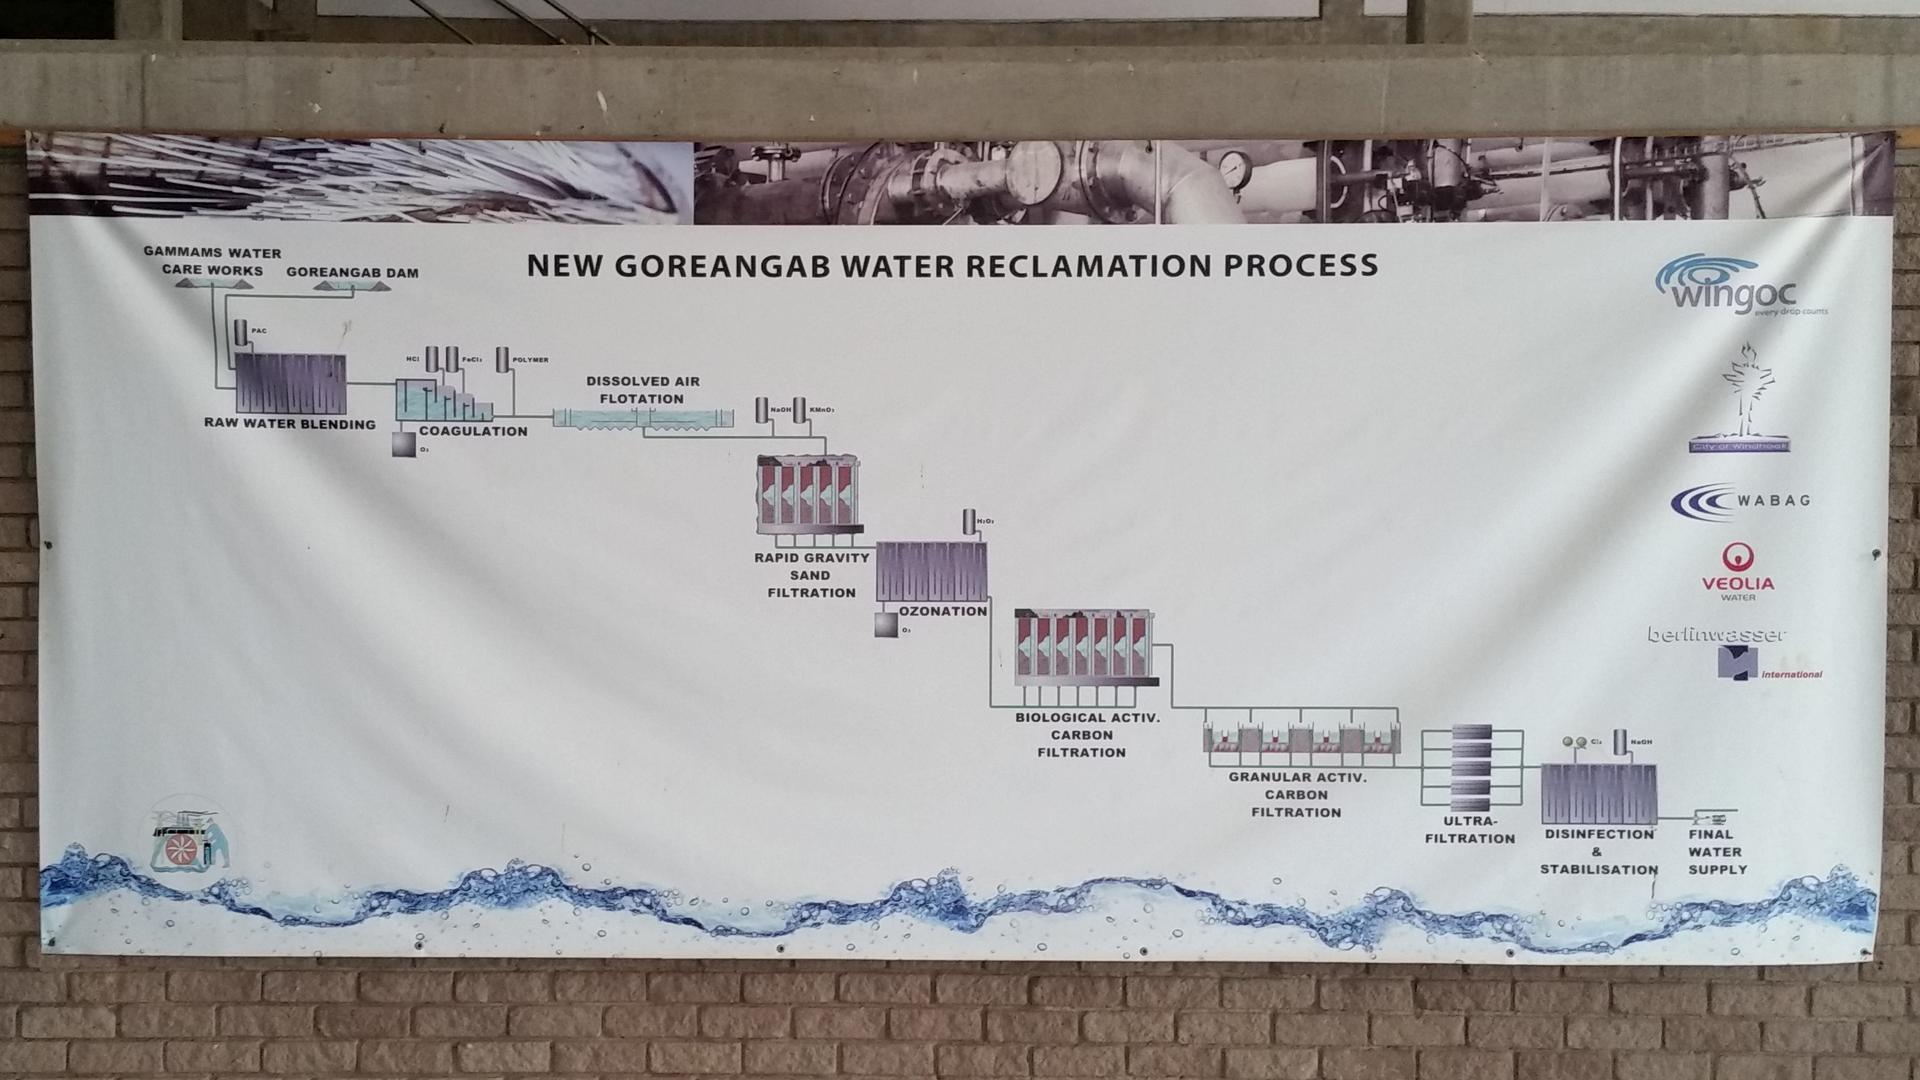 The Goreangab water treatment plant uses a process that partially mimics nature to turn sewage from Winhoek's 300,000 residents back into potable water. It opened in 1968 and was the first such plant in the world.